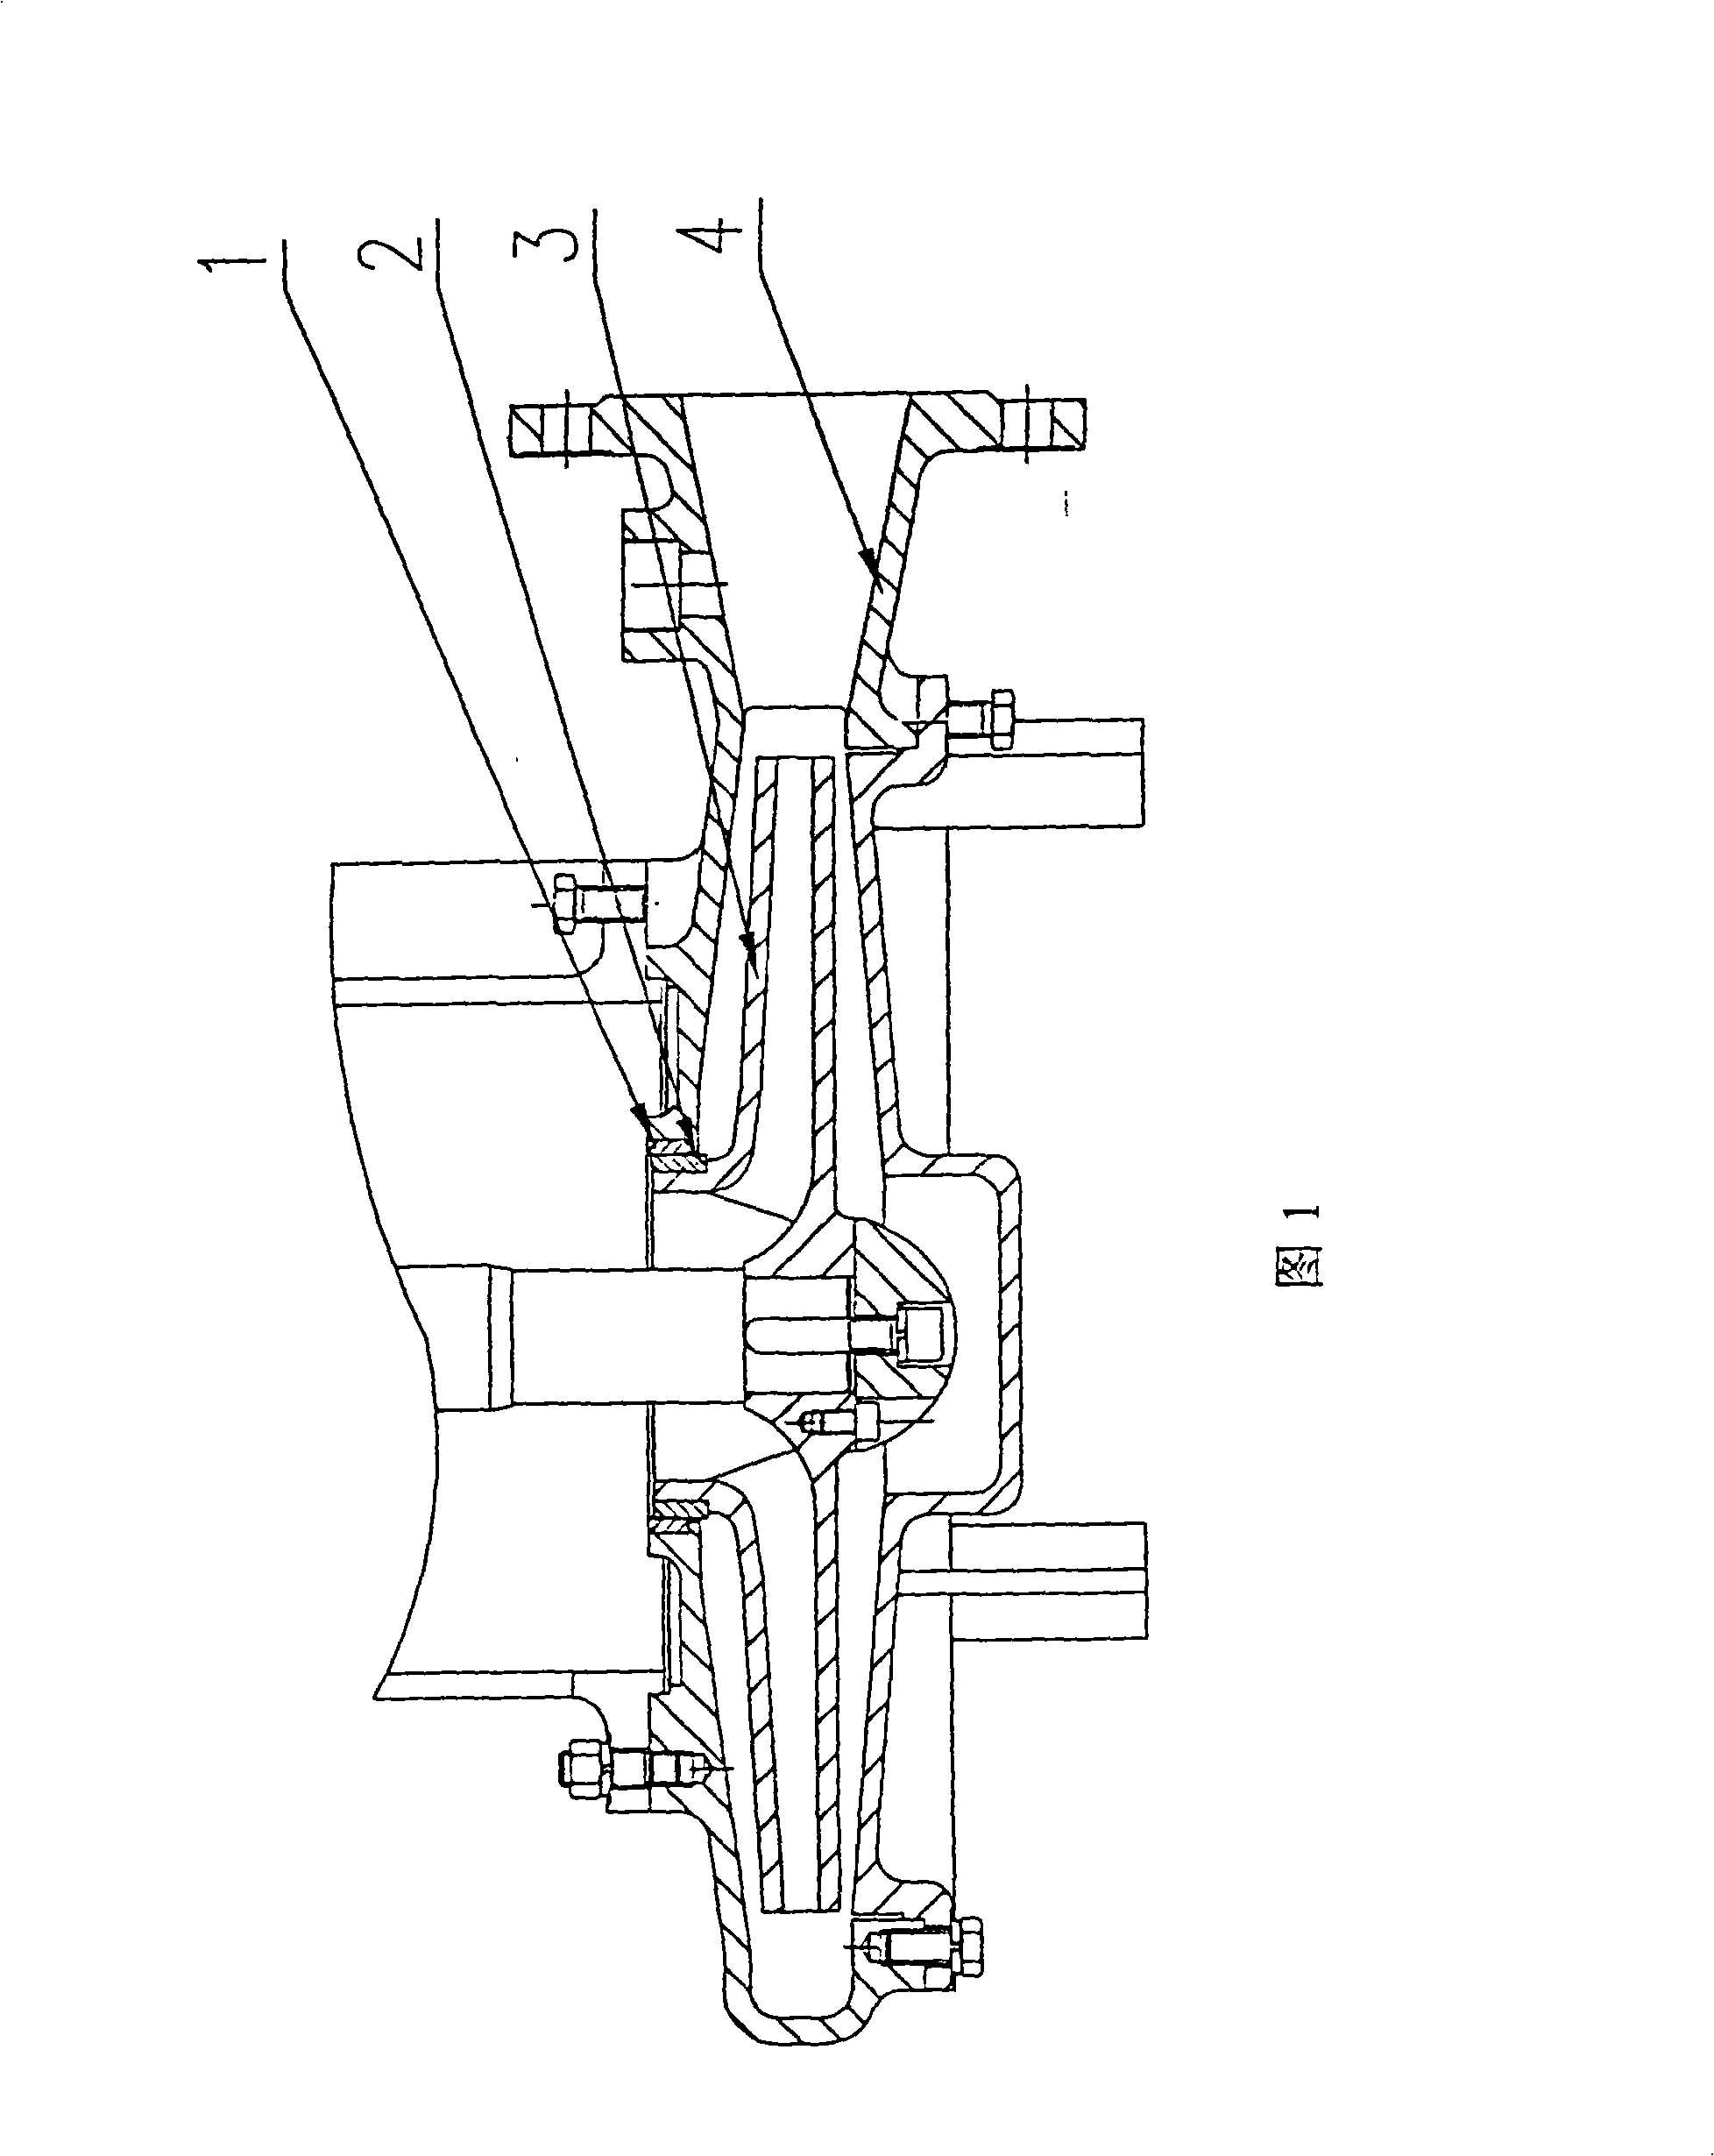 Method and structure for preventing explosion-proof submerged sewage pump orifice form generating friction spark and high temperature